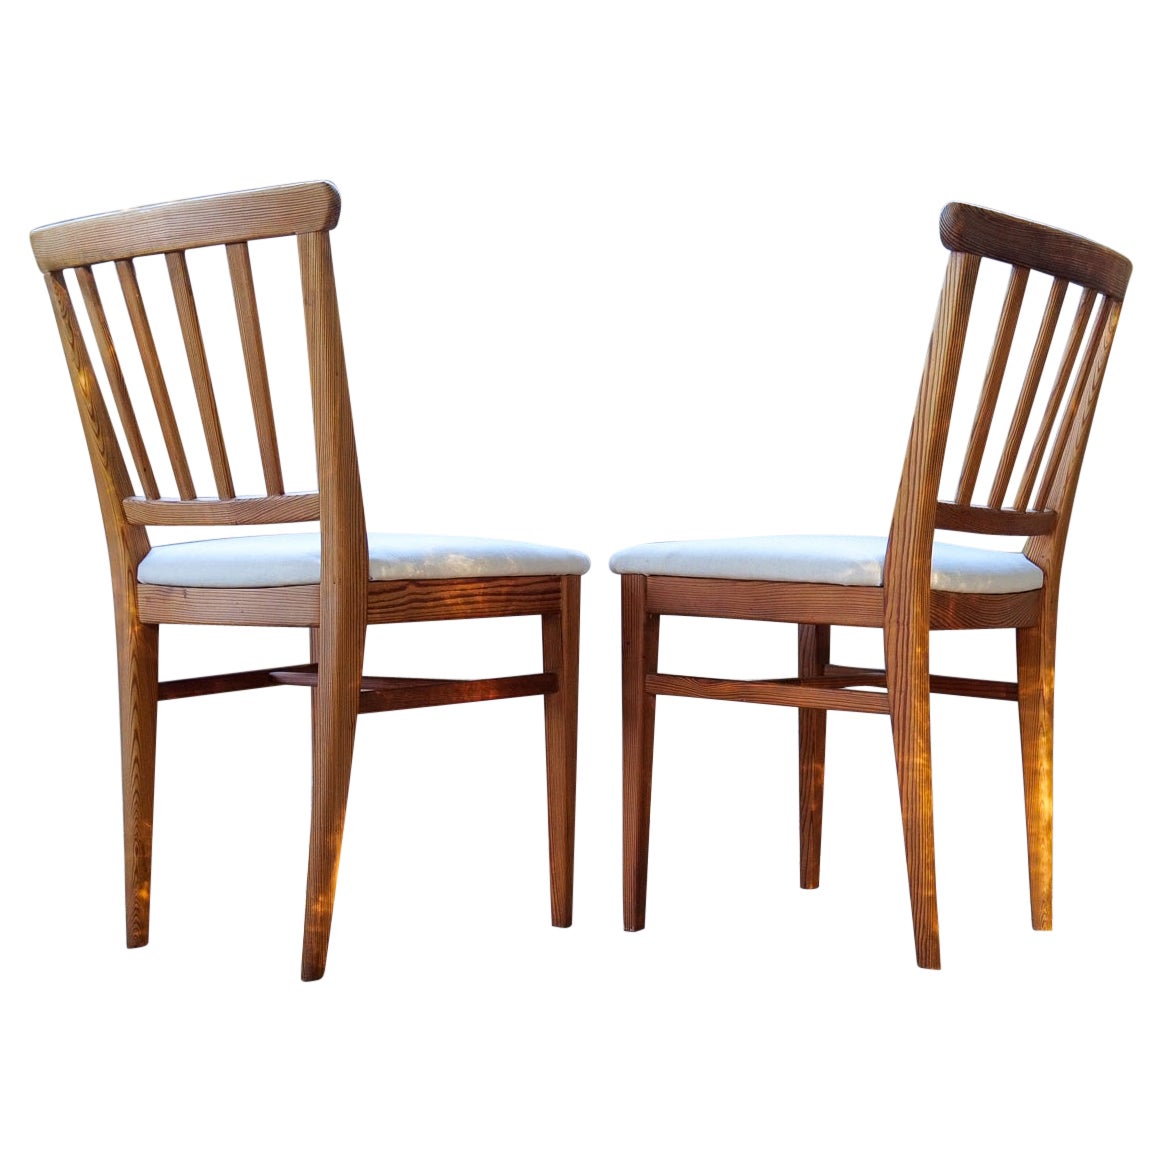 Midcentury Set of 4 Carl Malmsten Chairs Dining in Pine, Sweden, 1940s